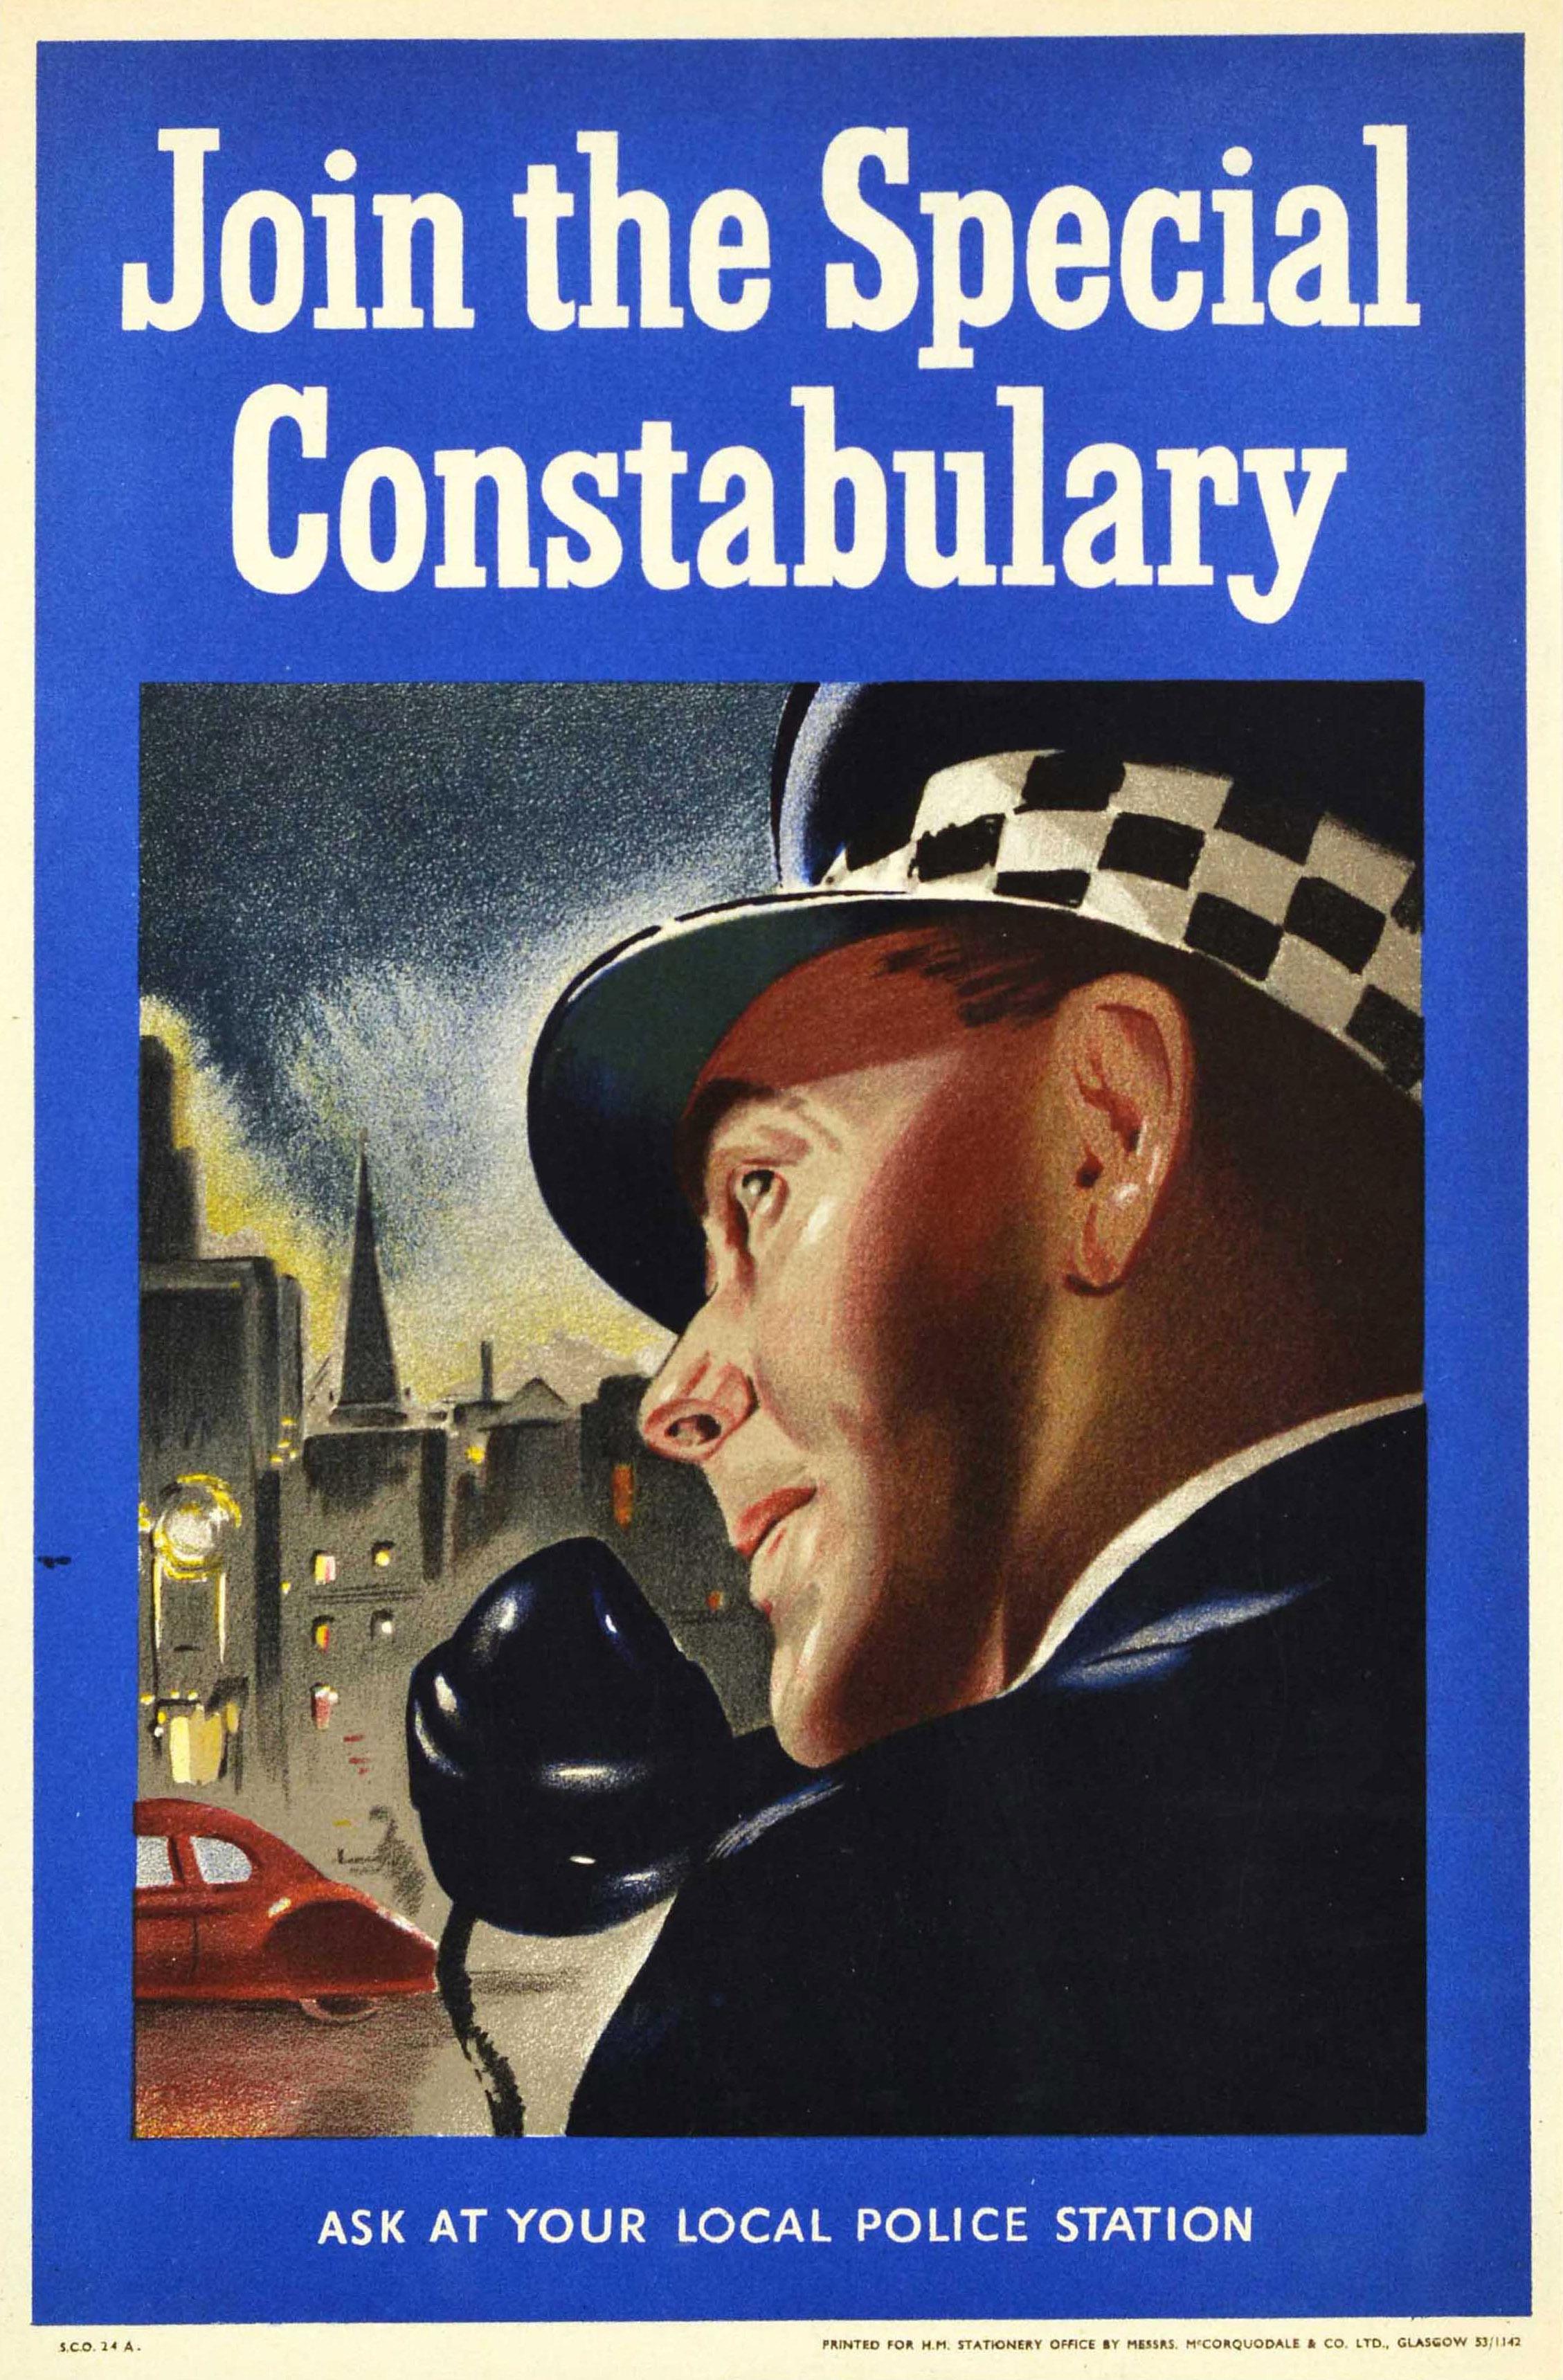 Unknown Print - Original Vintage Recruitment Poster Join The Special Constabulary Police Force